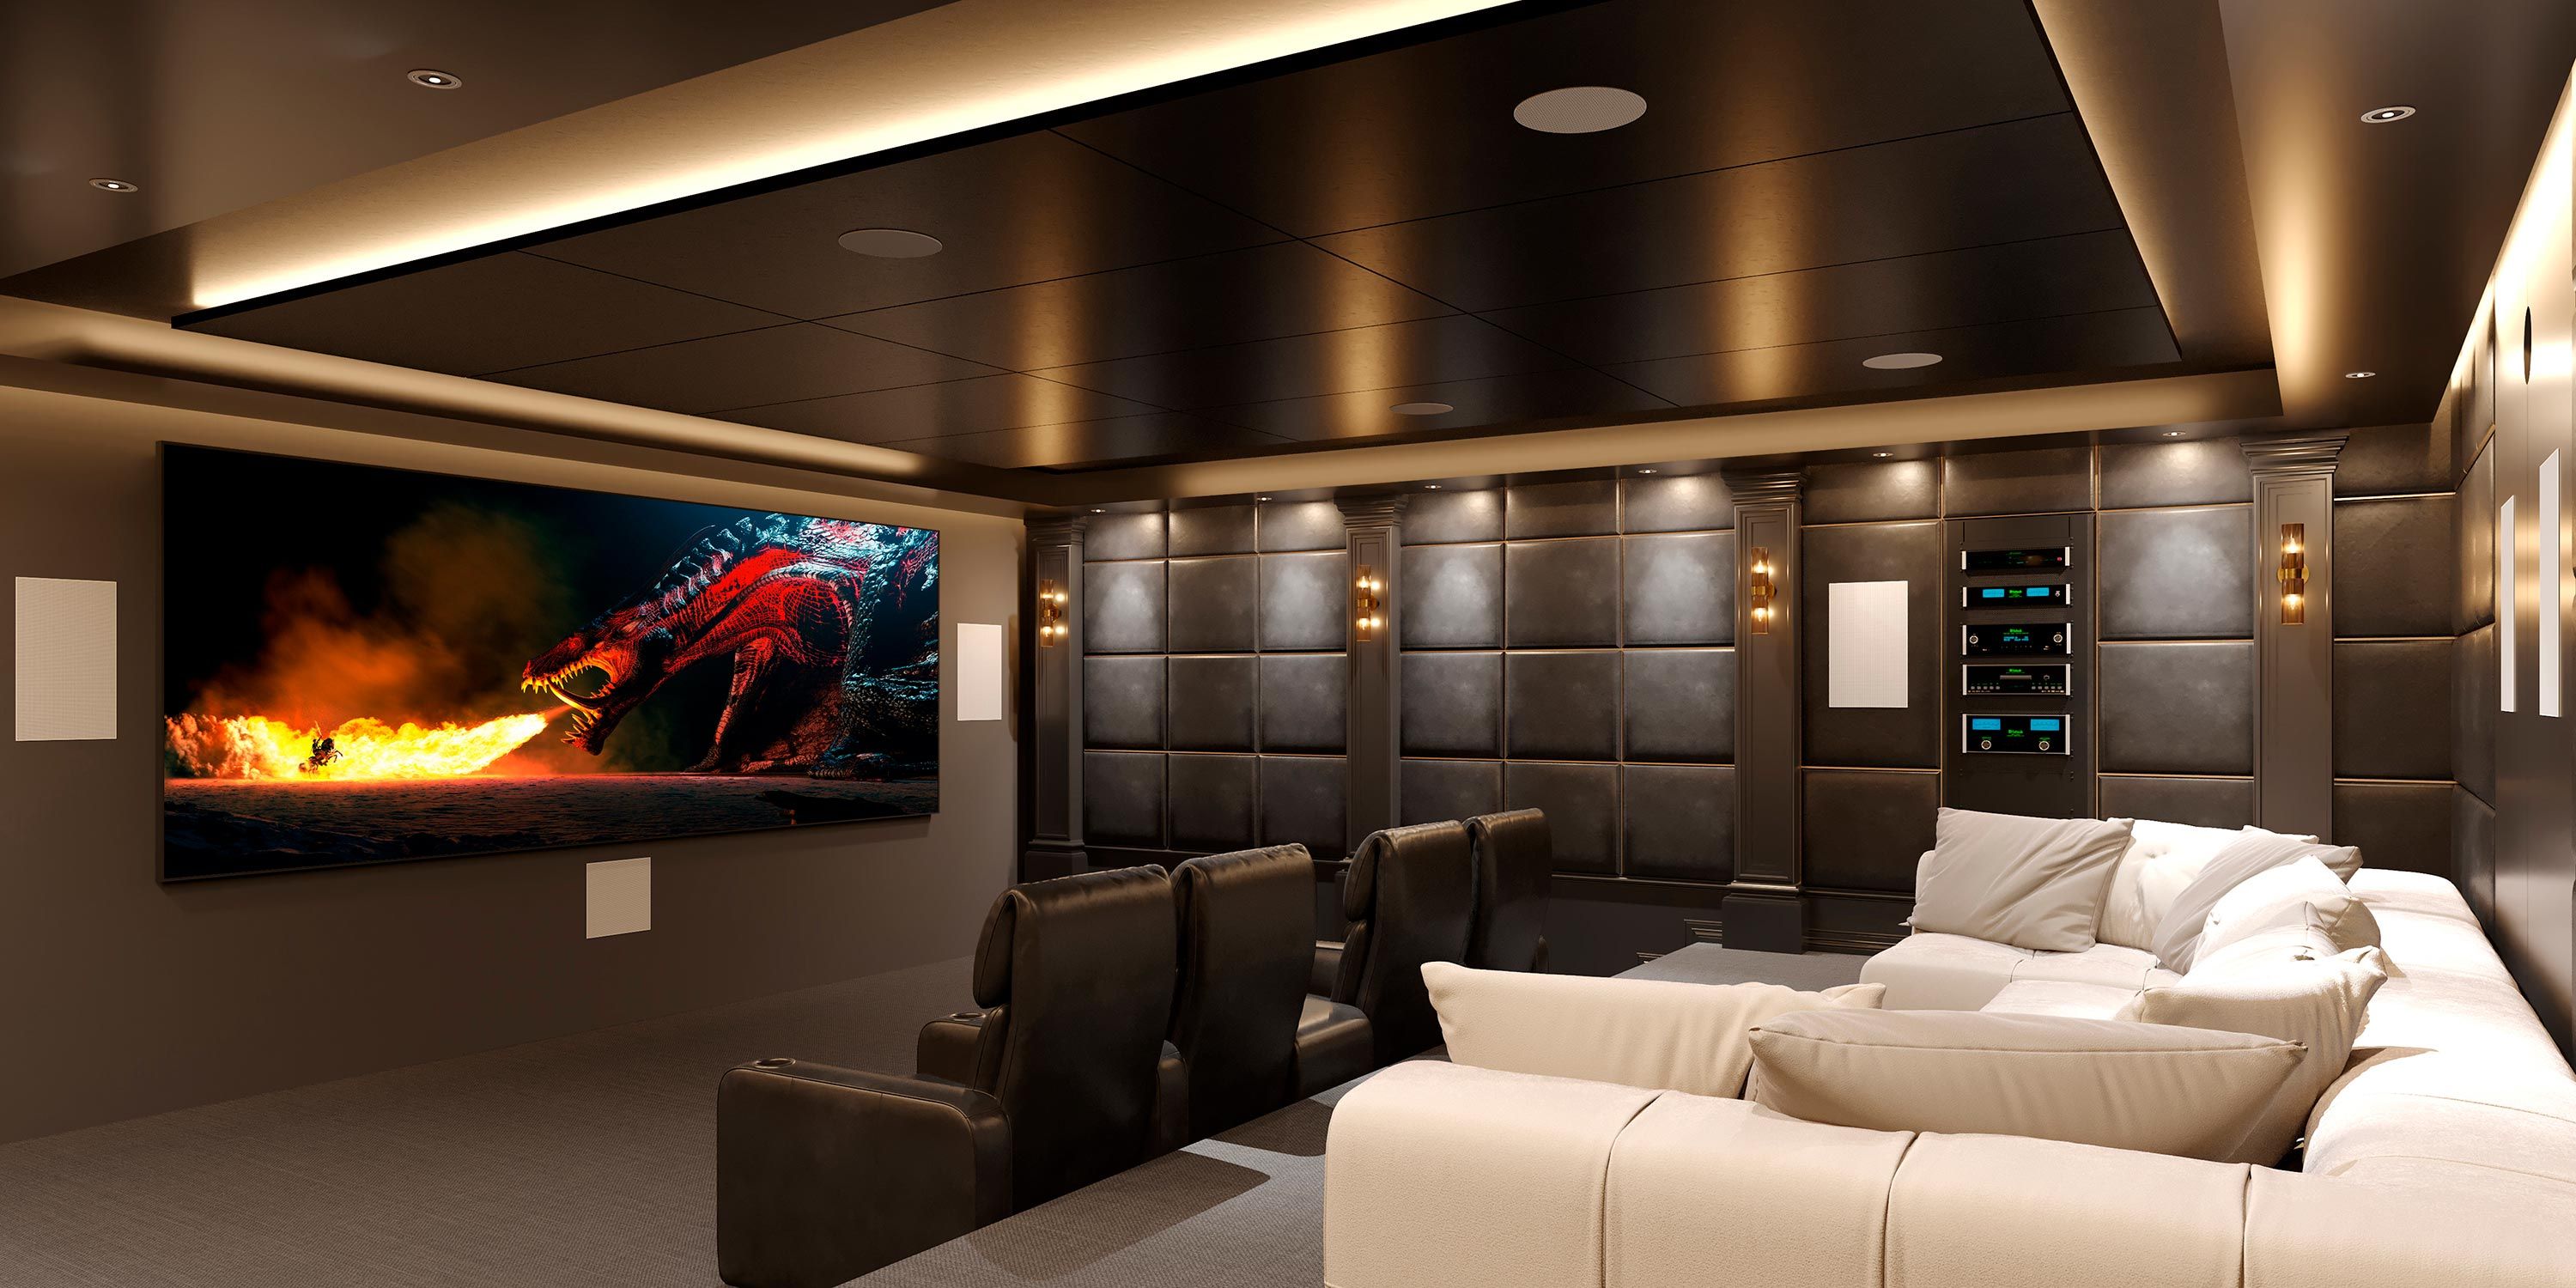 A home theater with a large screen showing a dragon, plush seating, and a sleek, modern design.